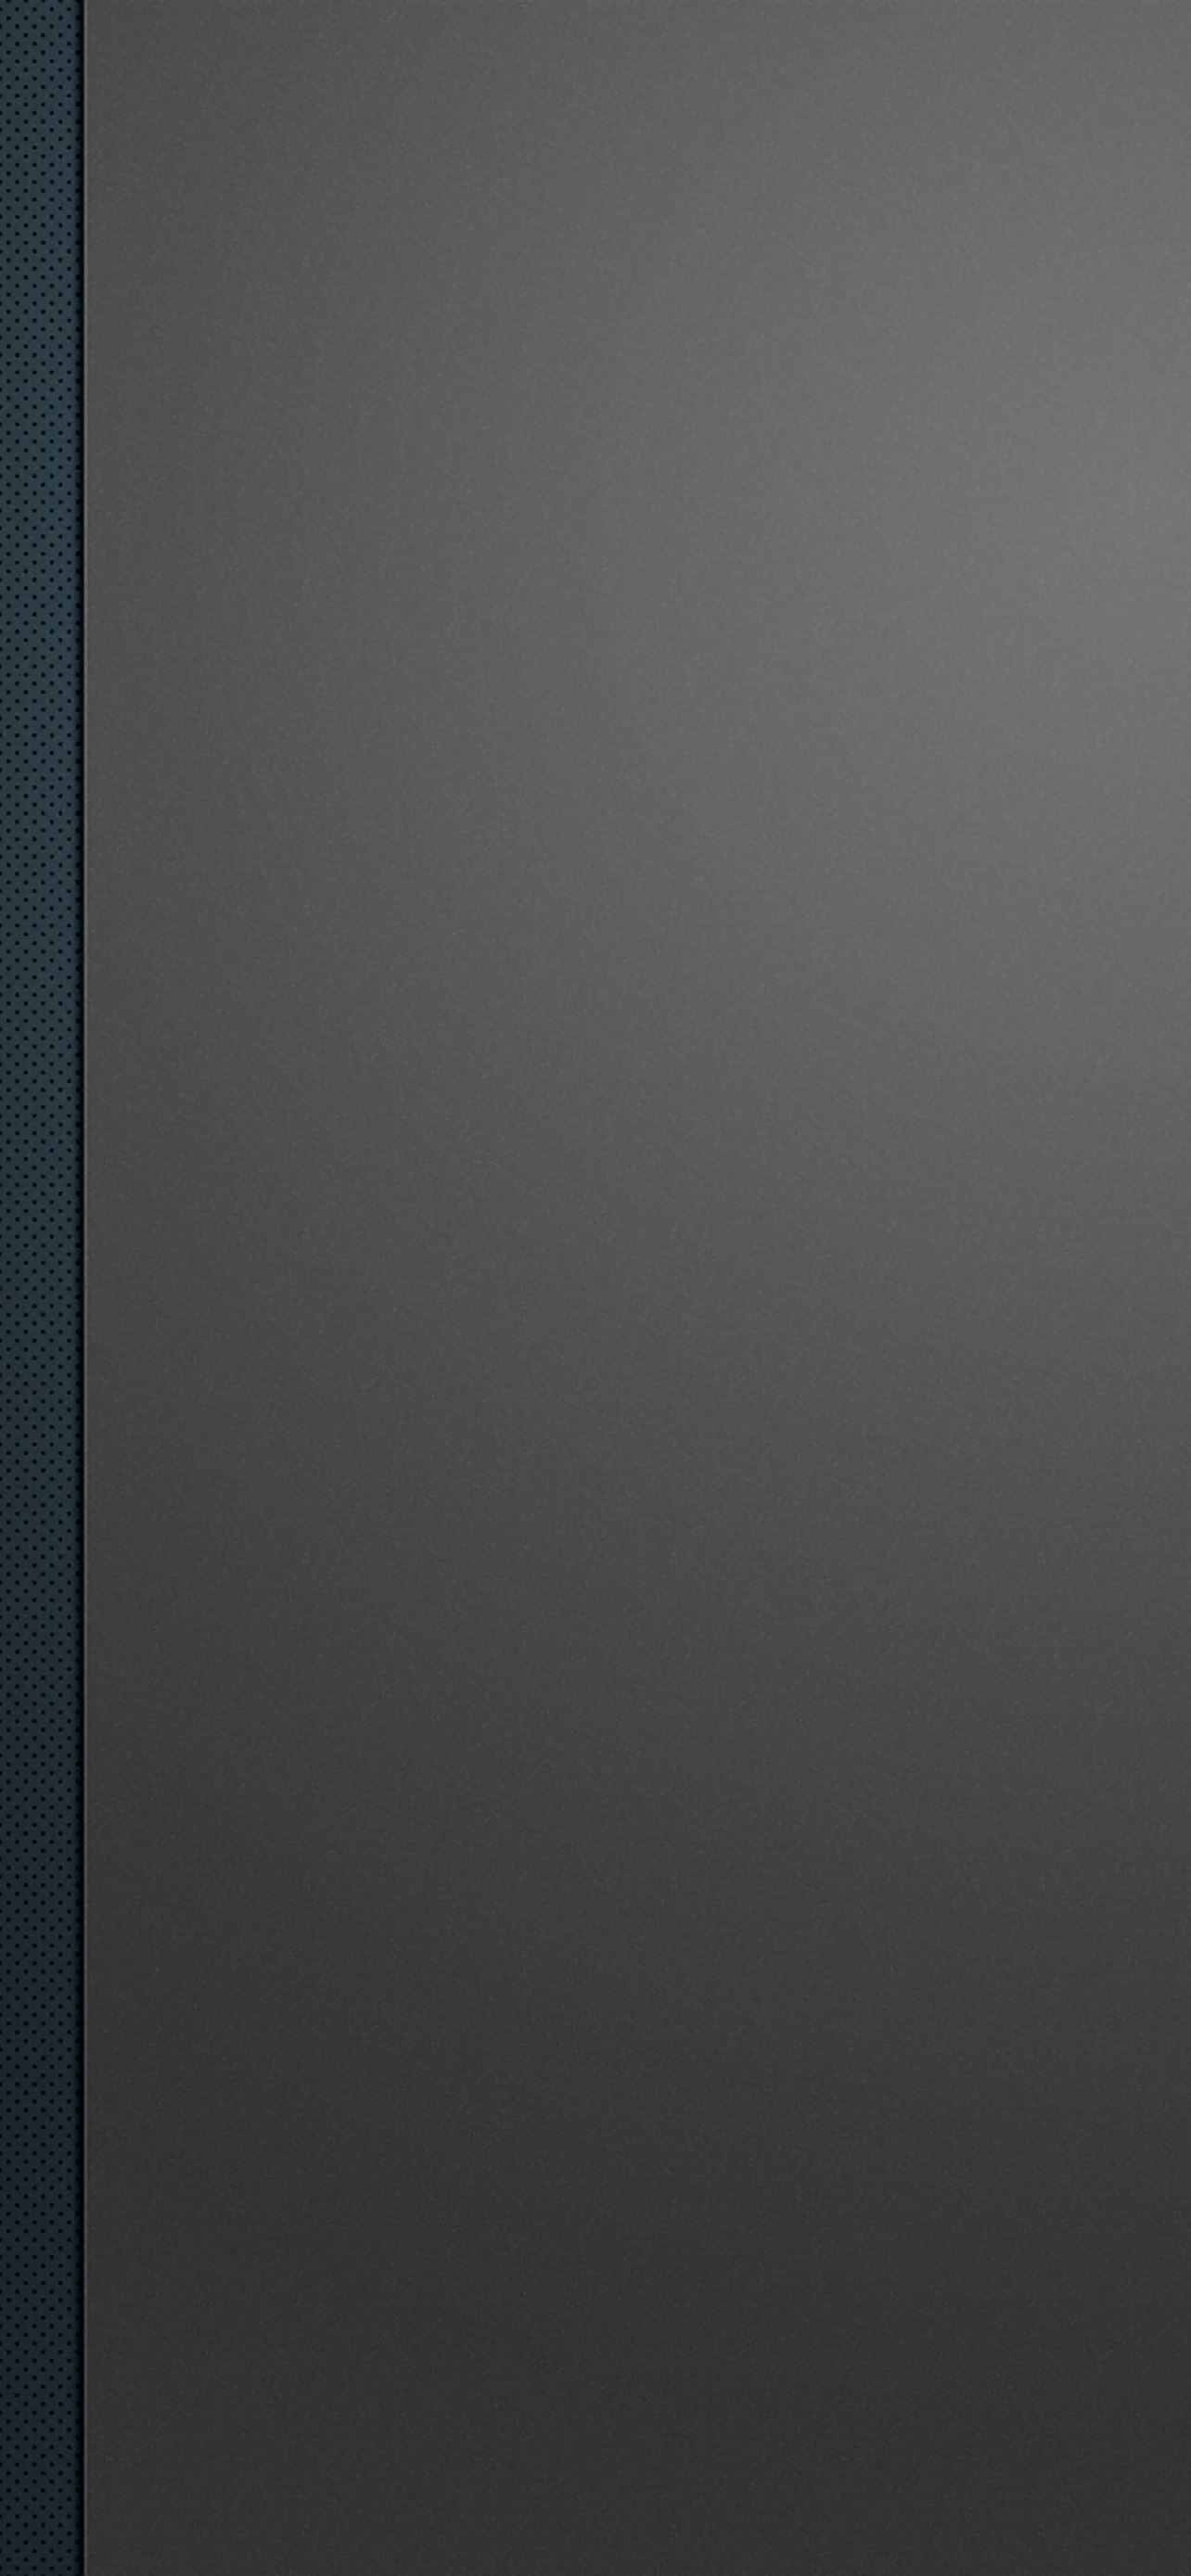 Gray and blue Metal iPhone Wallpaper Free Download